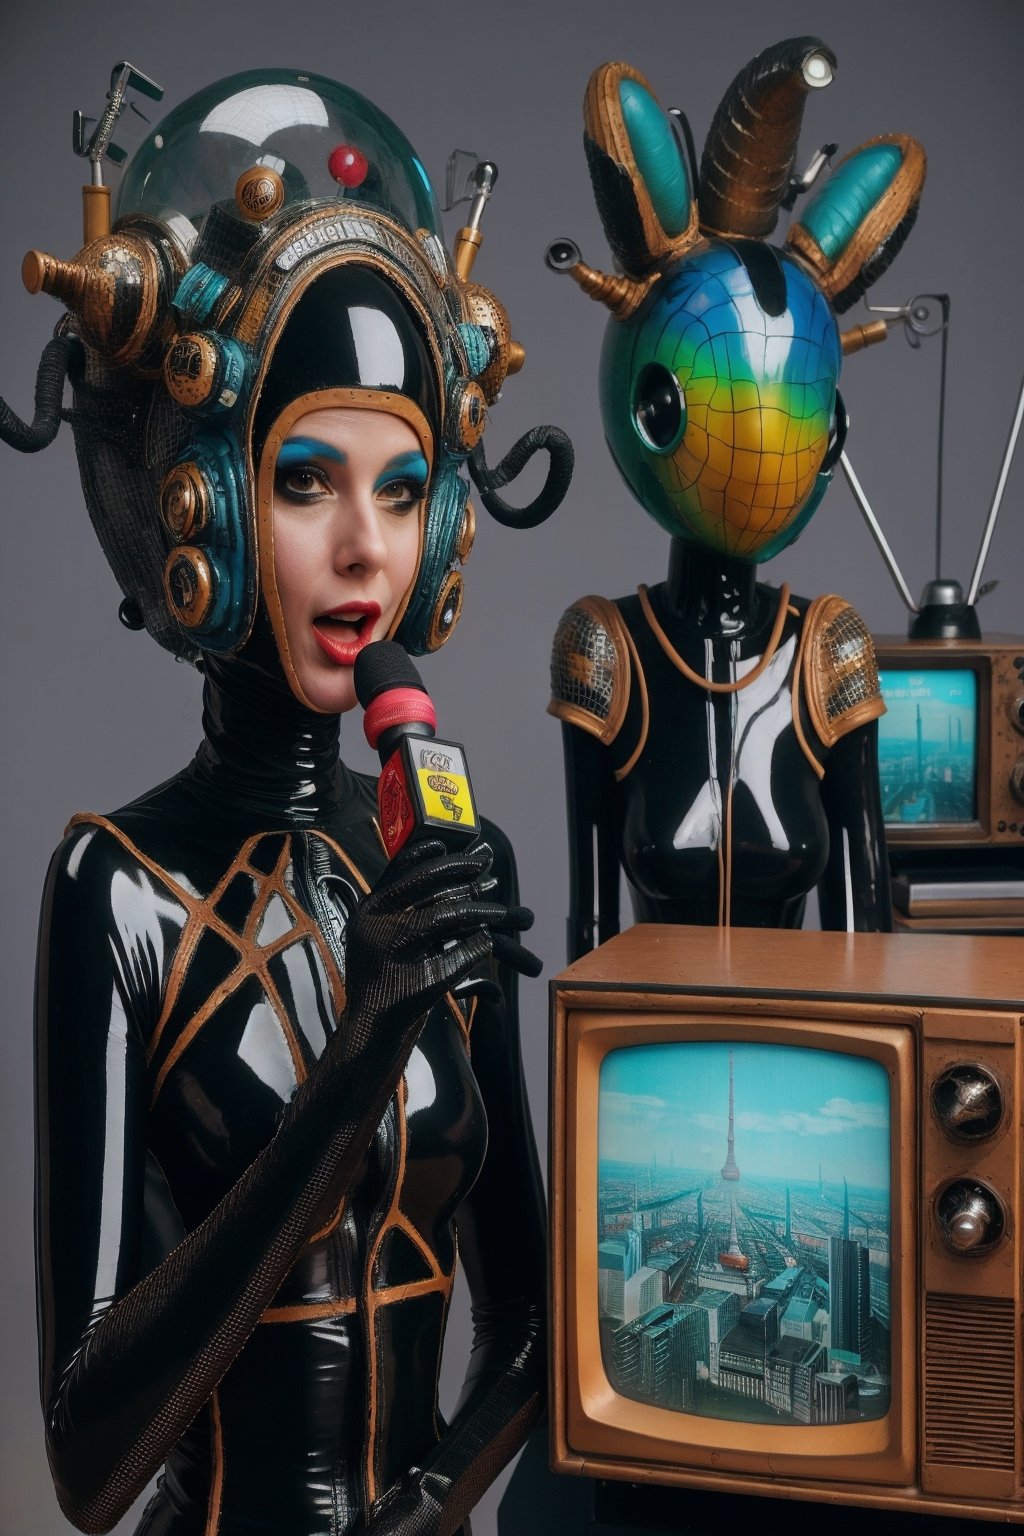 berlin megacity retro-futuristic  host for strange talk show with various guests on television,she is wearing bizarre obscure wholebodyrubbersuitwithaccessories  fashion photo shoot